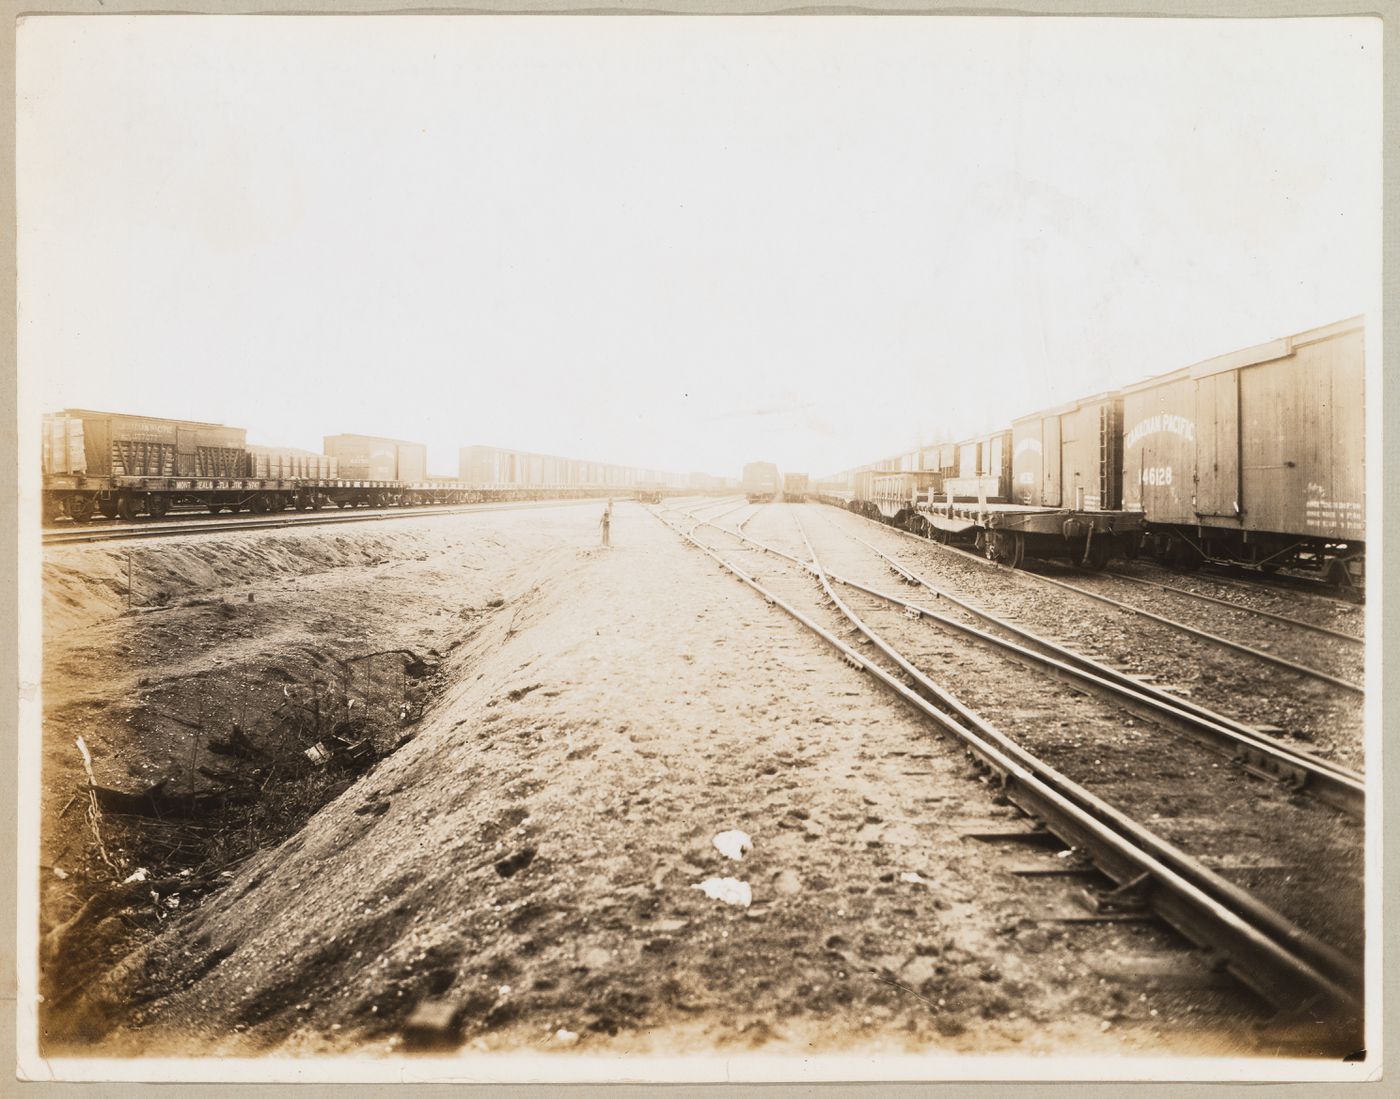 View of the Canadian Pacific Railroad Company freight yards showing trains, Coquitlam (now Port Coquitlam), British Columbia